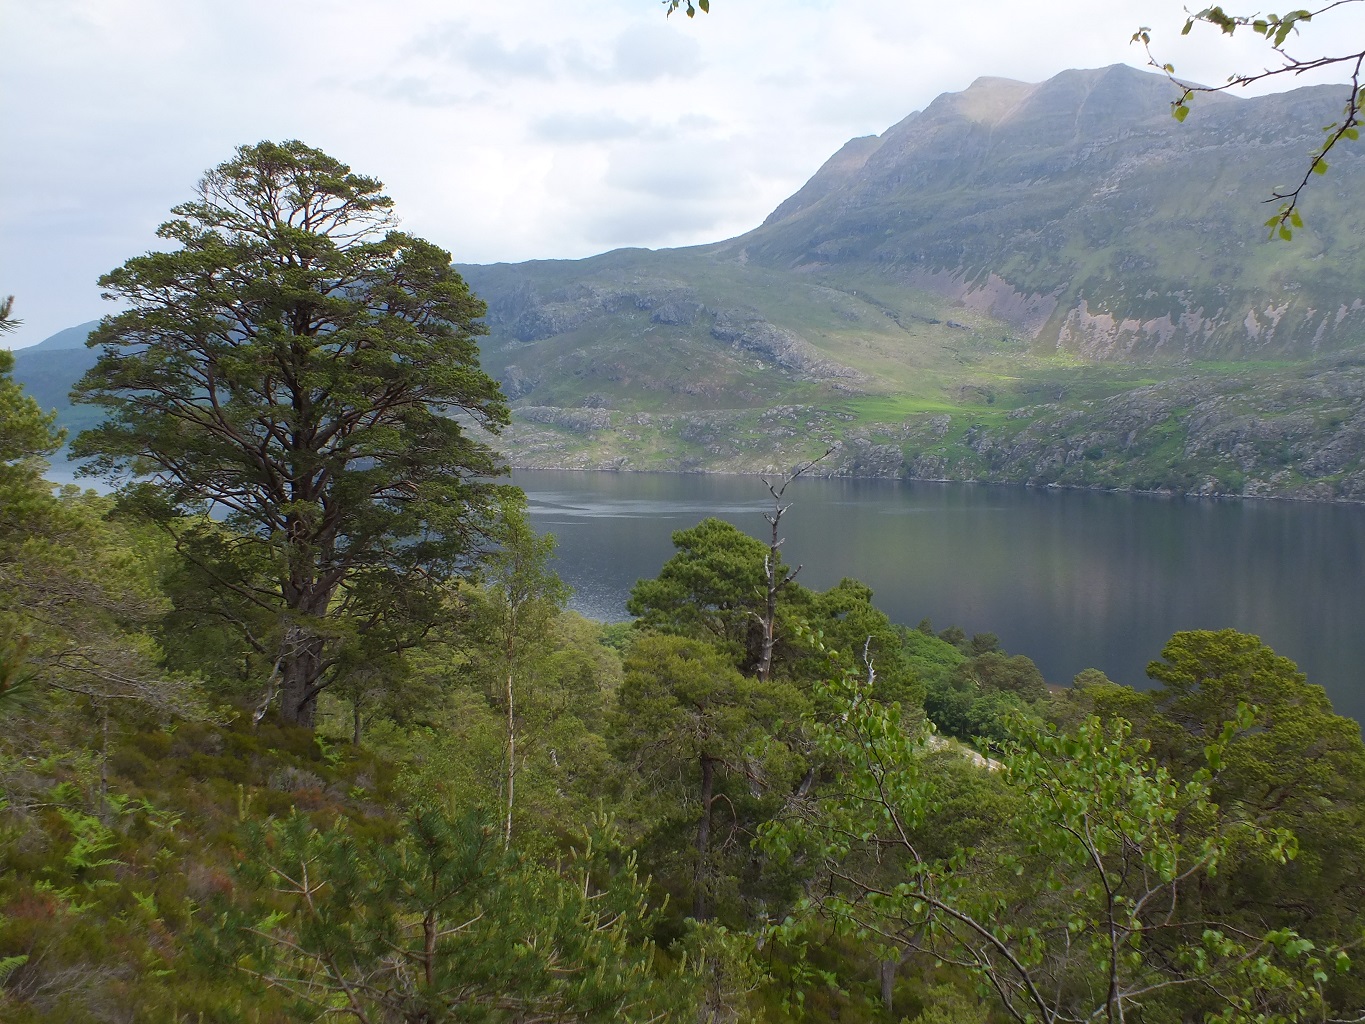 Green trees in the foreground, with a lake on the other side of the lak is a steep mountain